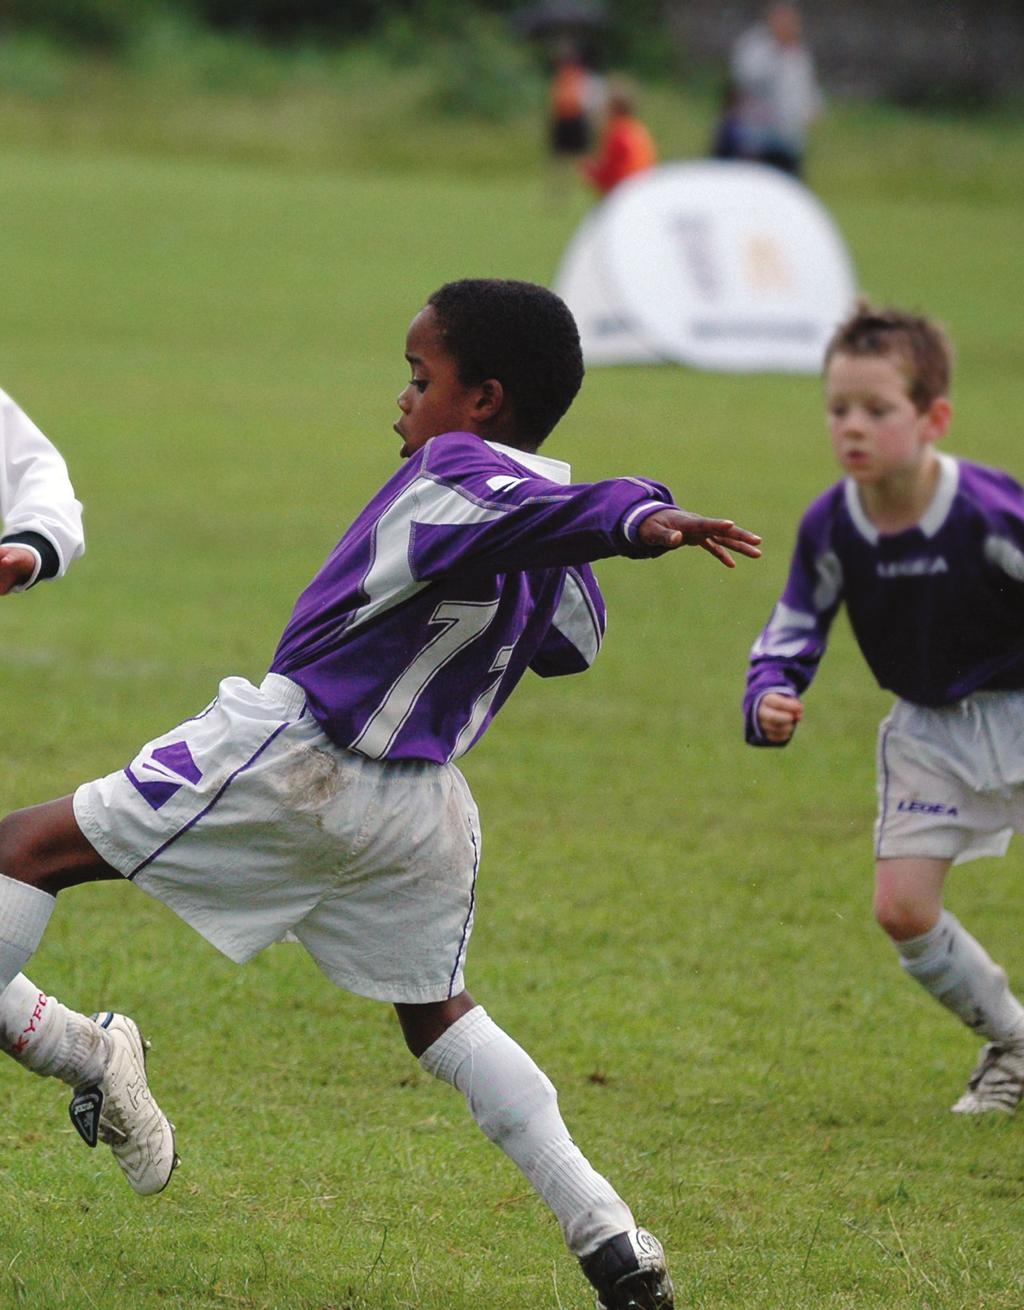 The new FA Youth Development Review provides an ambitious strategy which promises to build on existing good practice and further embed mini-soccer and small sided games as central pillars of children